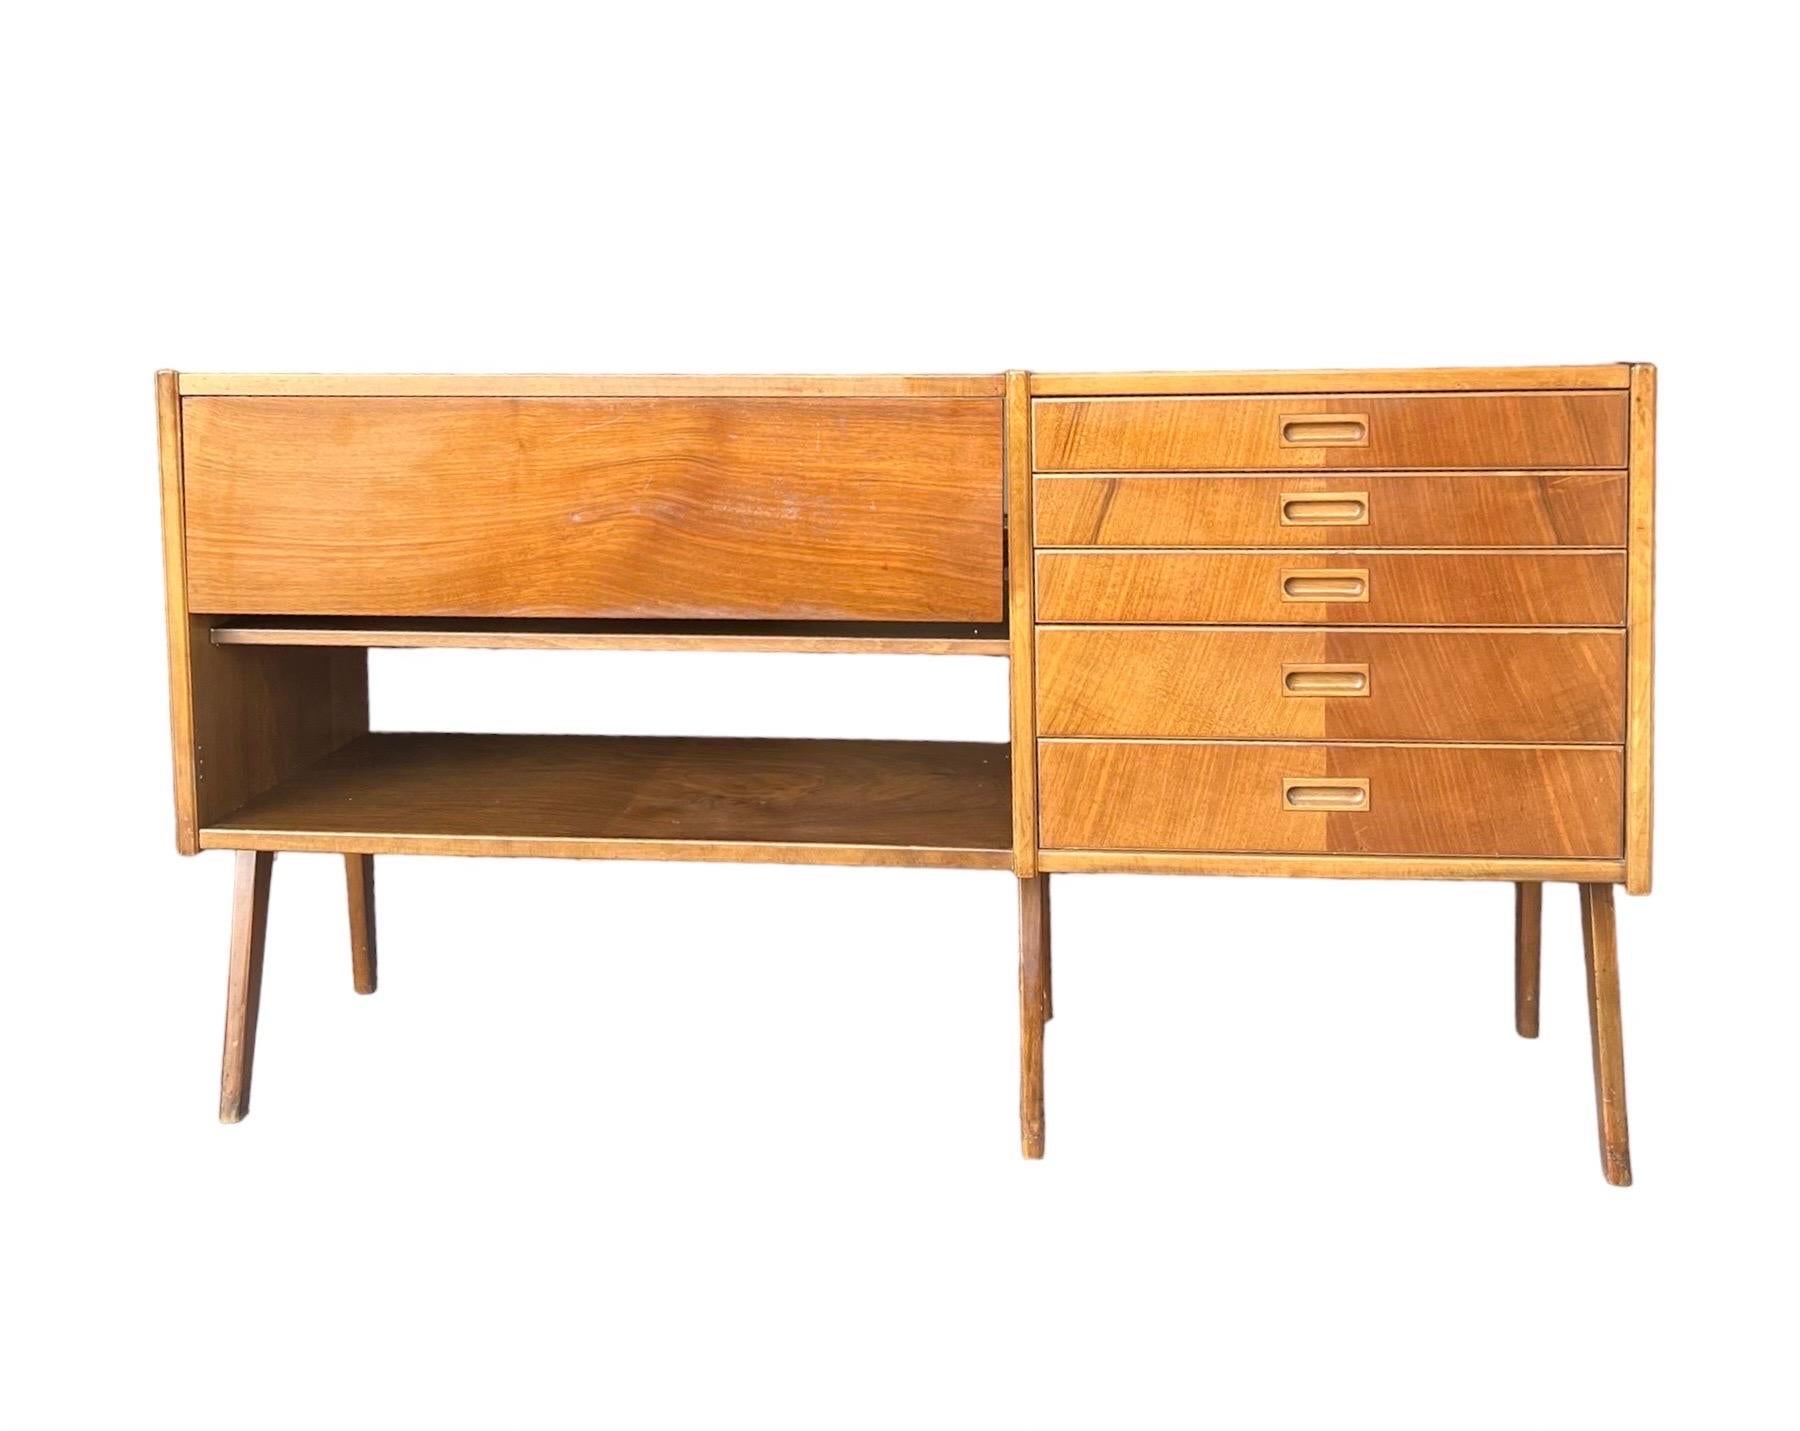 Vintage Mid Century Modern credenza or buffet, made in Sweden! A unique and well made piece featuring a drop down leaf to extend your top surface space, open tiered shelving for storage and 5 pull out drawers. Shelves are adjustable if you'd like to